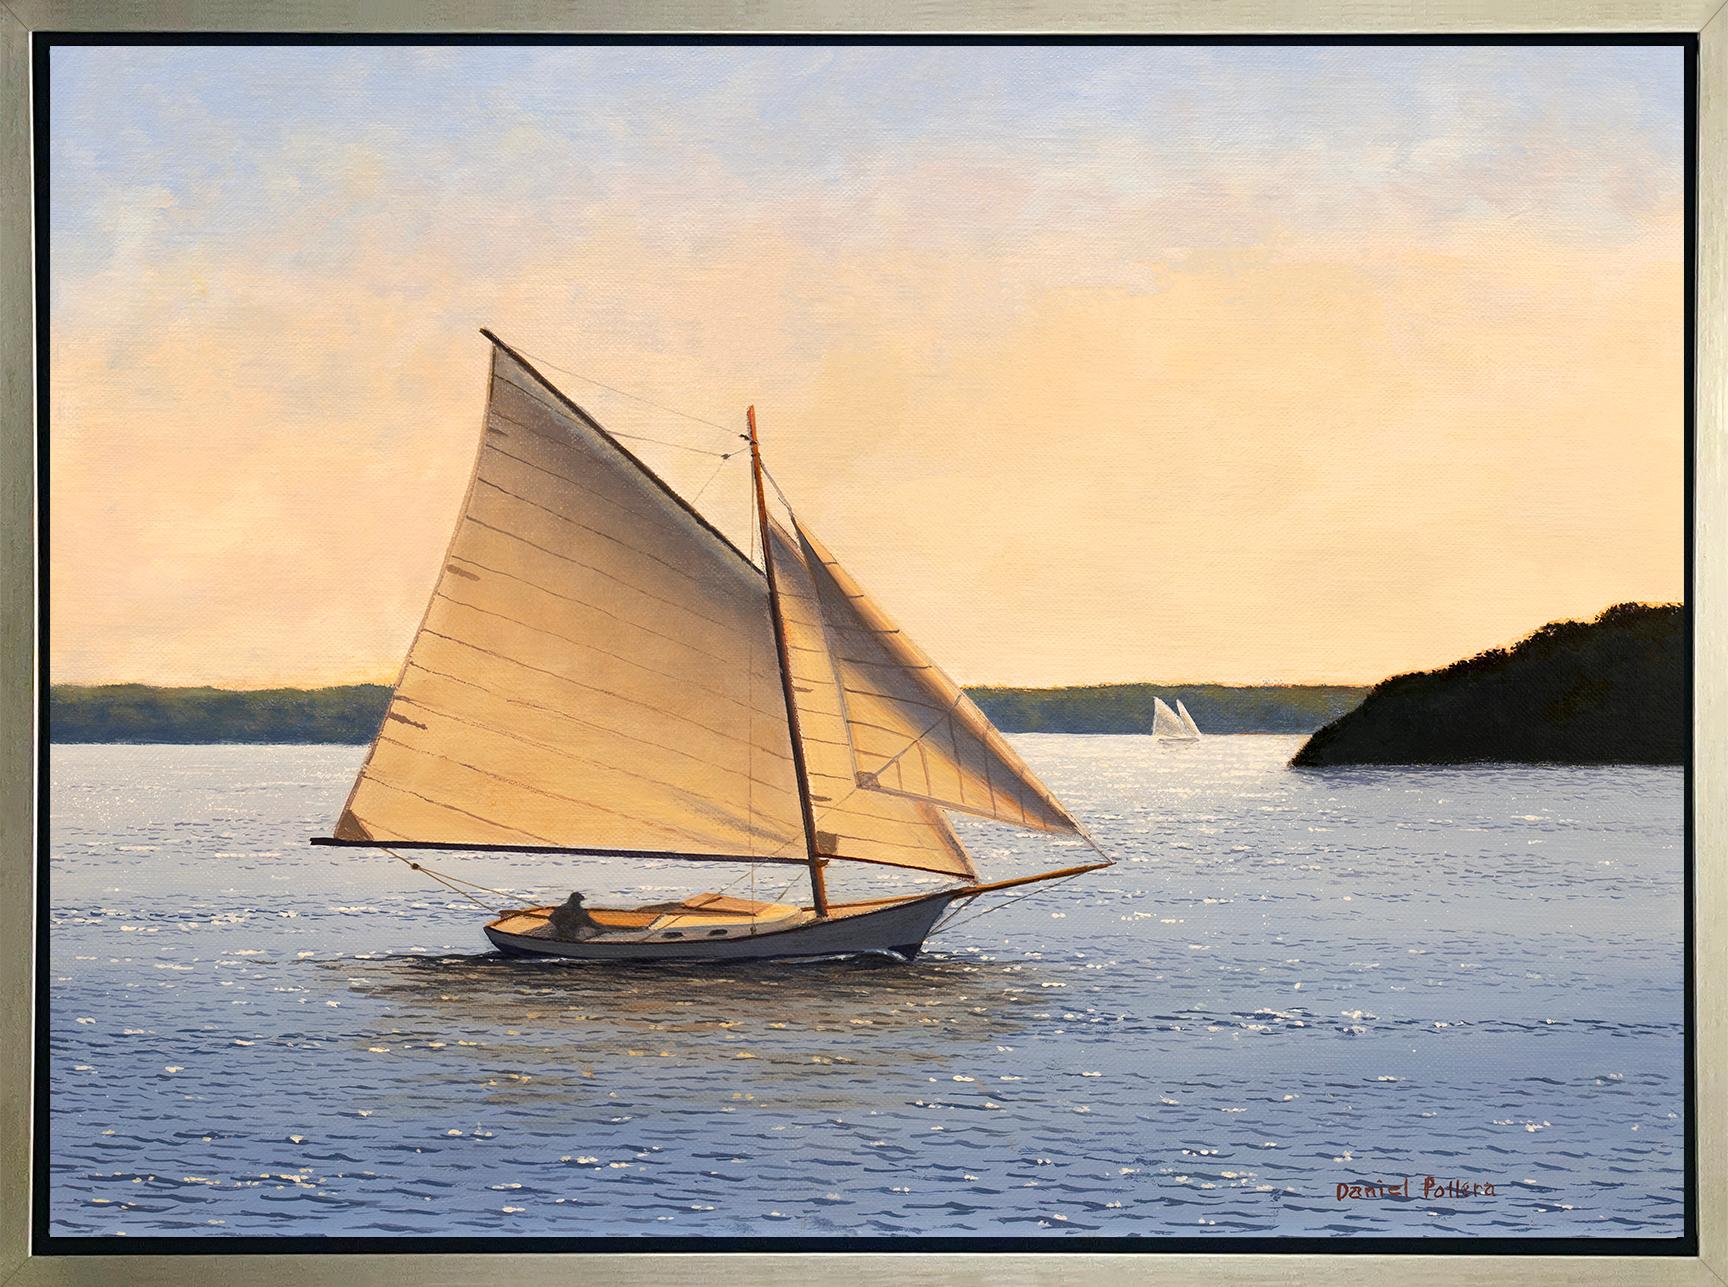 Daniel Pollera Landscape Print - "Sailing Out to Sea, " Framed Limited Edition Giclee Print, 18" x 24"